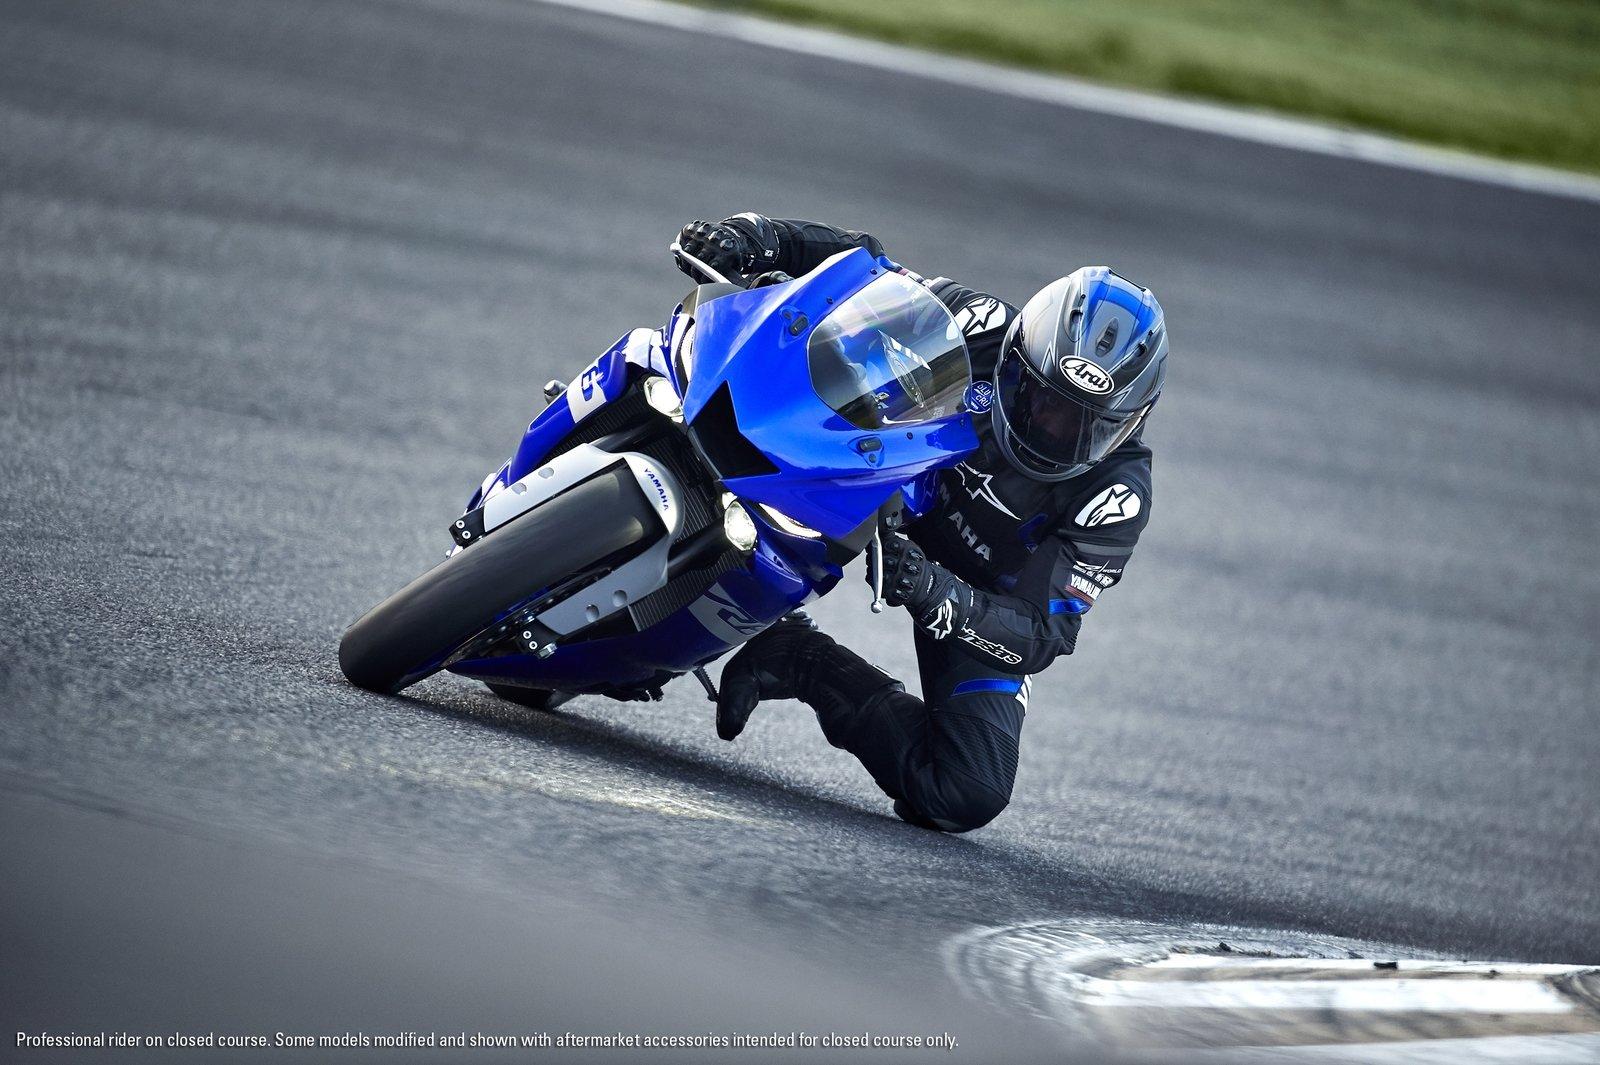 2020 Yamaha YZF R6 Picture, Photo, Wallpaper